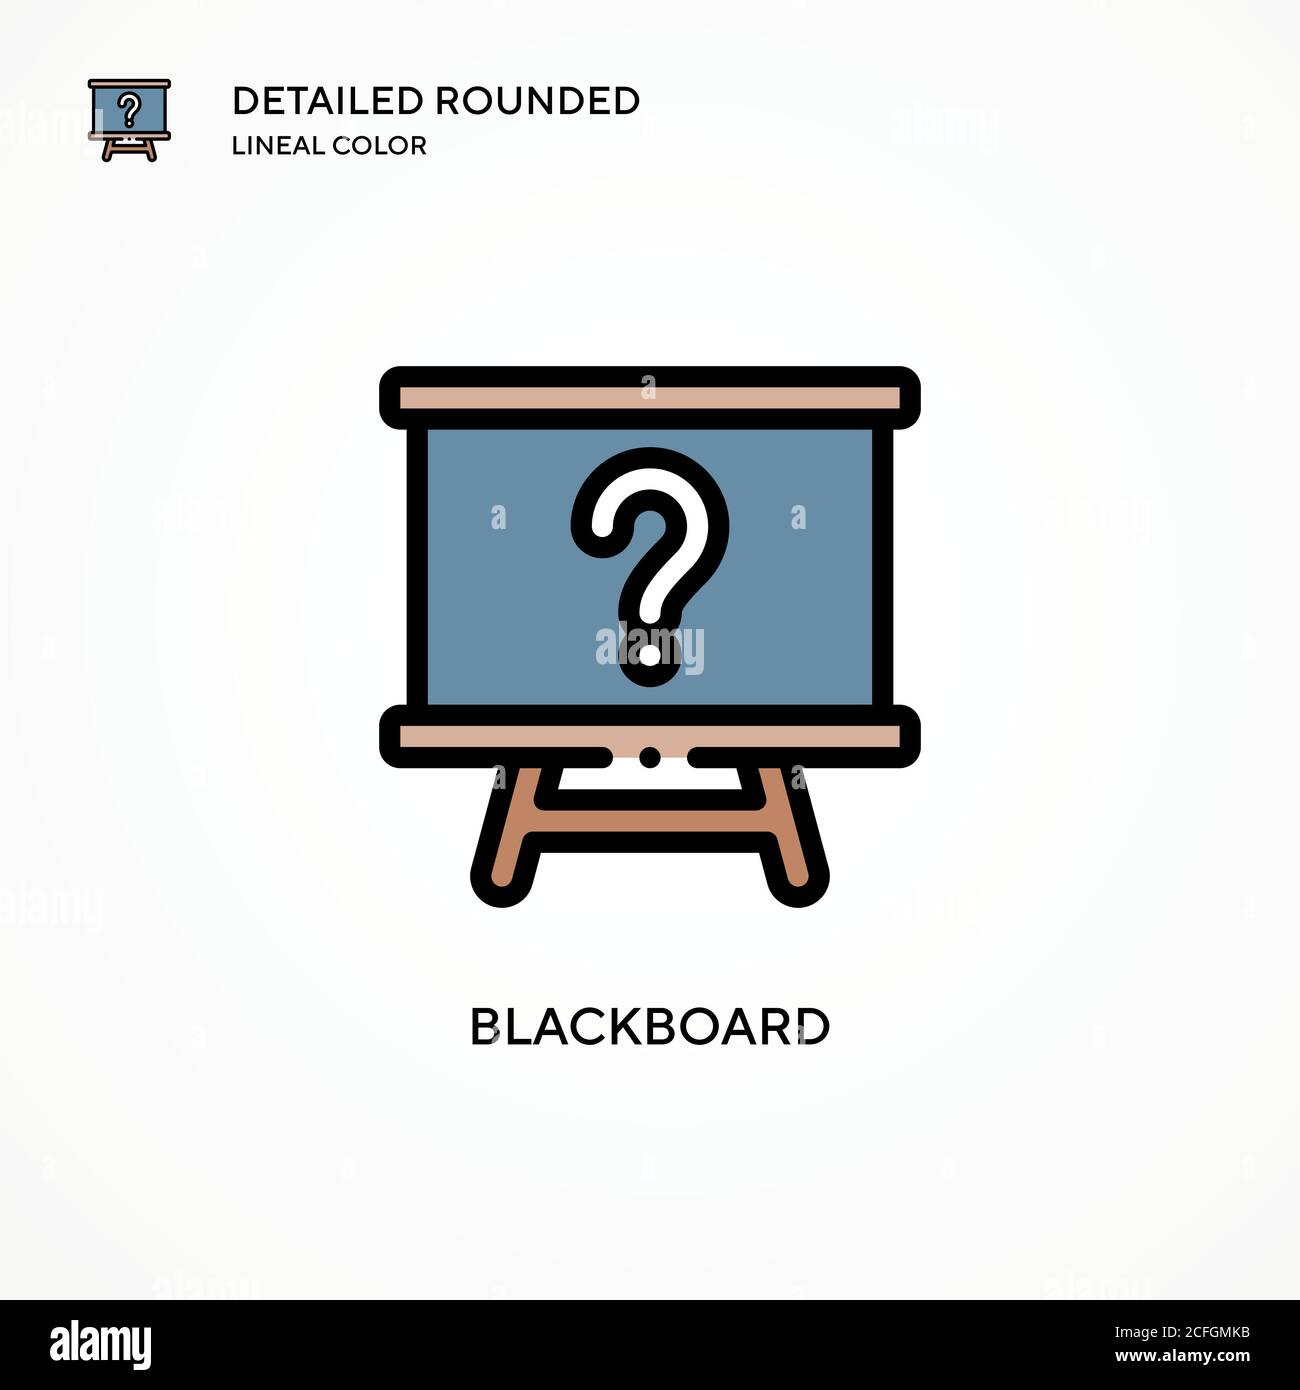 Blackboard vector icon. Modern vector illustration concepts. Easy to edit and customize. Stock Vector